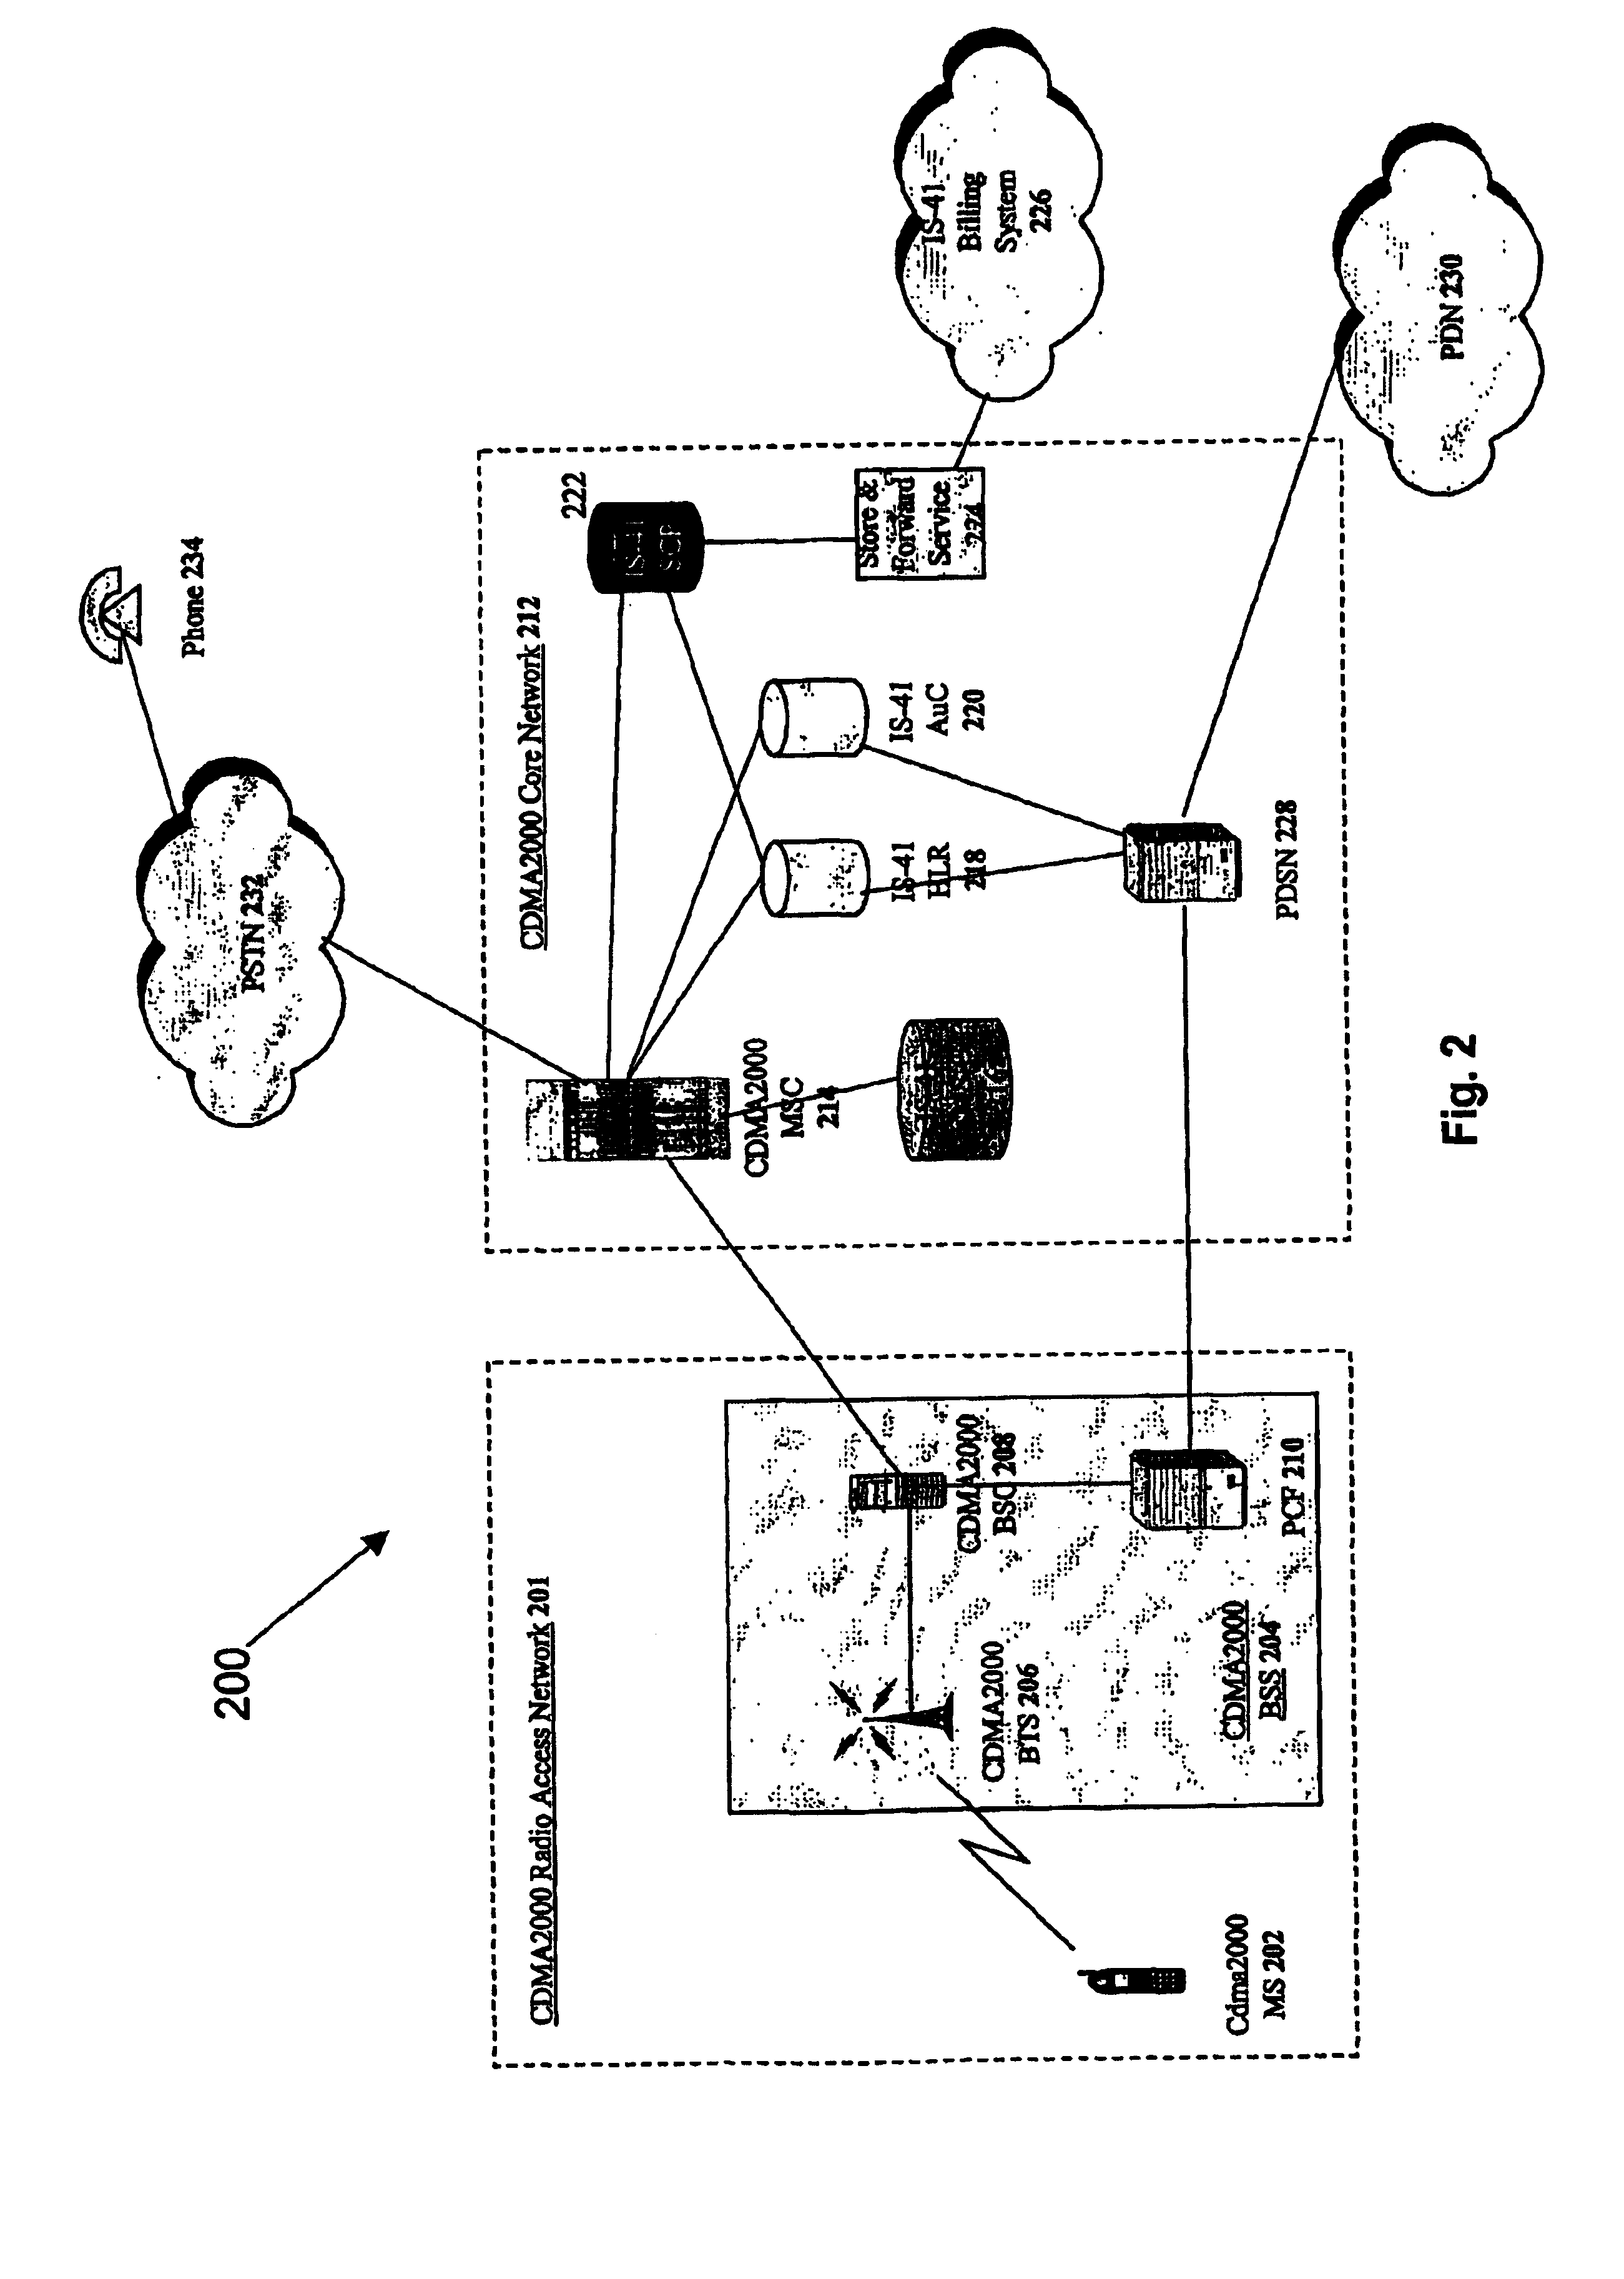 Method and system to send sms messages in a hybrid network